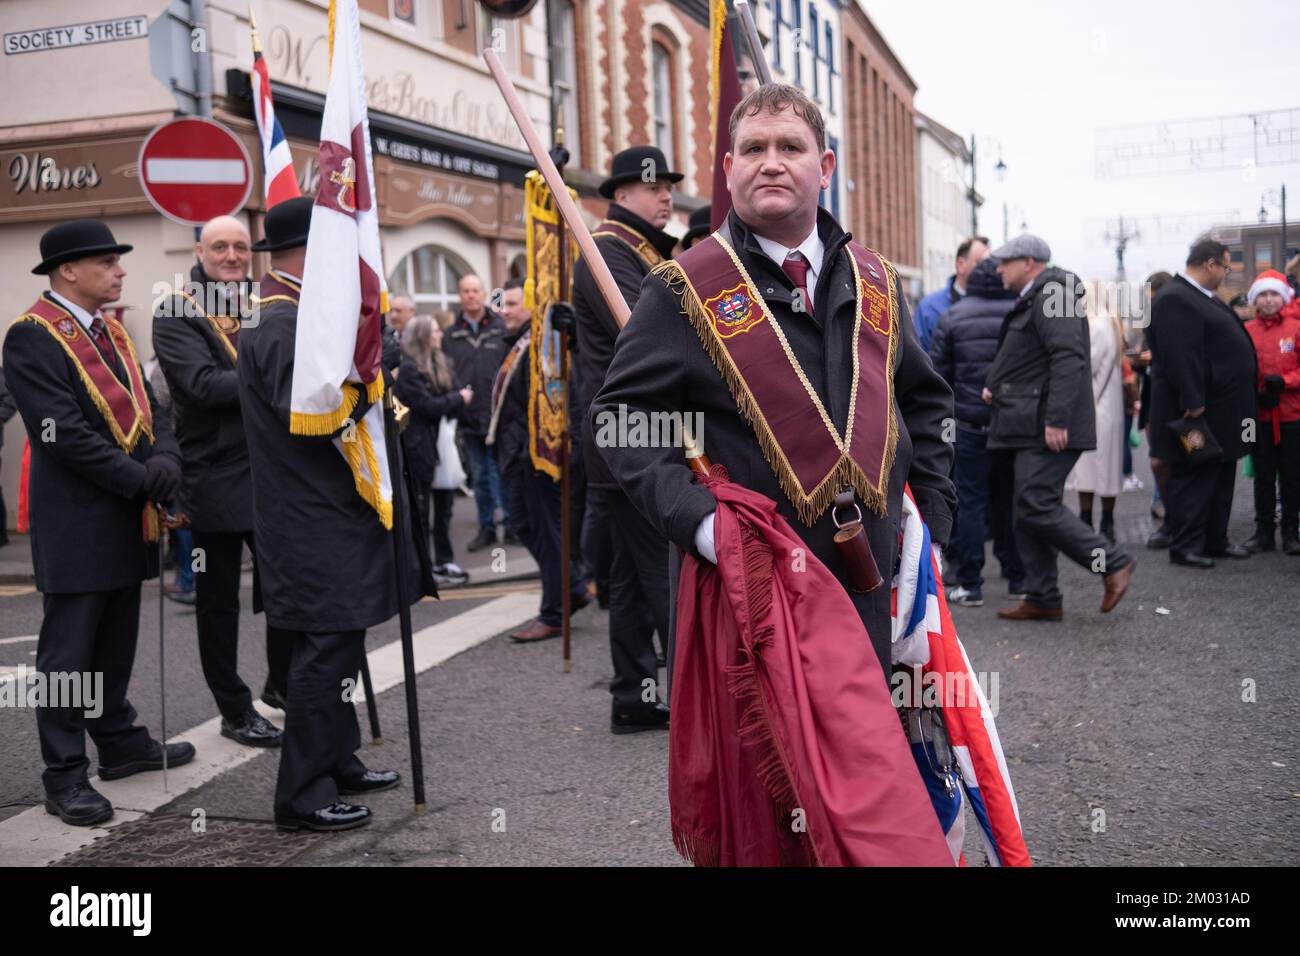 Londonderry, United Kingdom. 3 Dec, 2022. Members of the Apprentice Boys of Derry preparing to parade at Shutting of the Gates 2022. Credit: Steve Nimmons/Alamy Live News Stock Photo